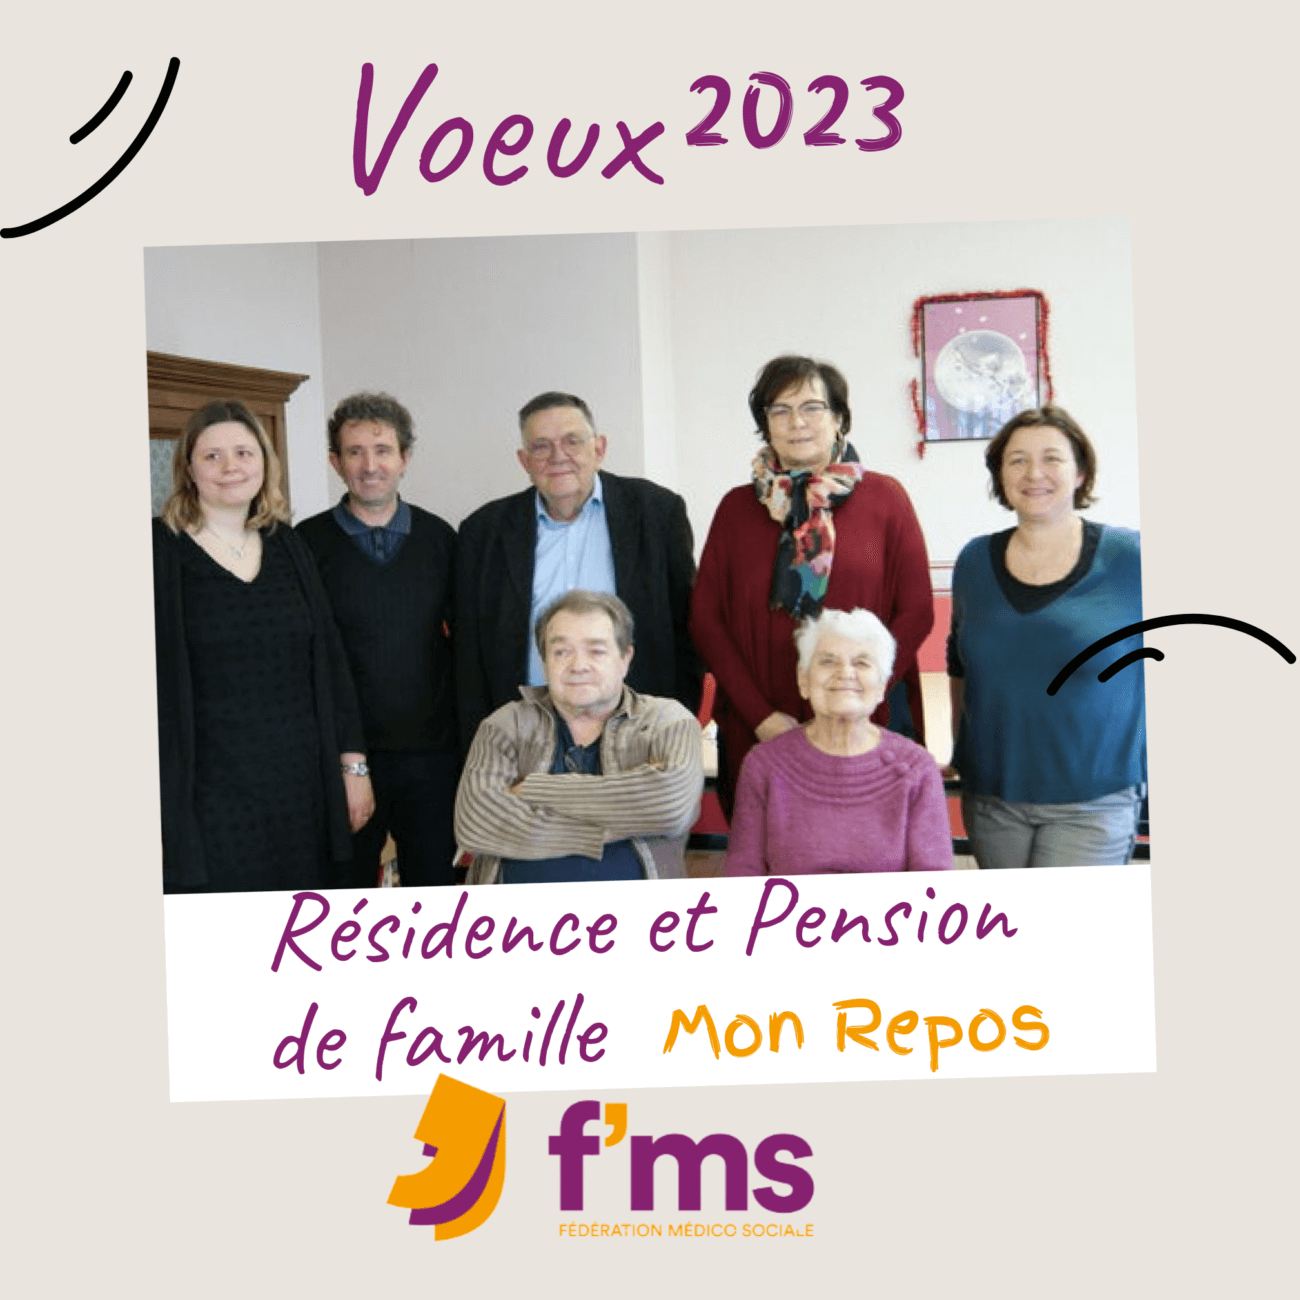 voeux rupt sur moselle residence mon repos - 1 fms